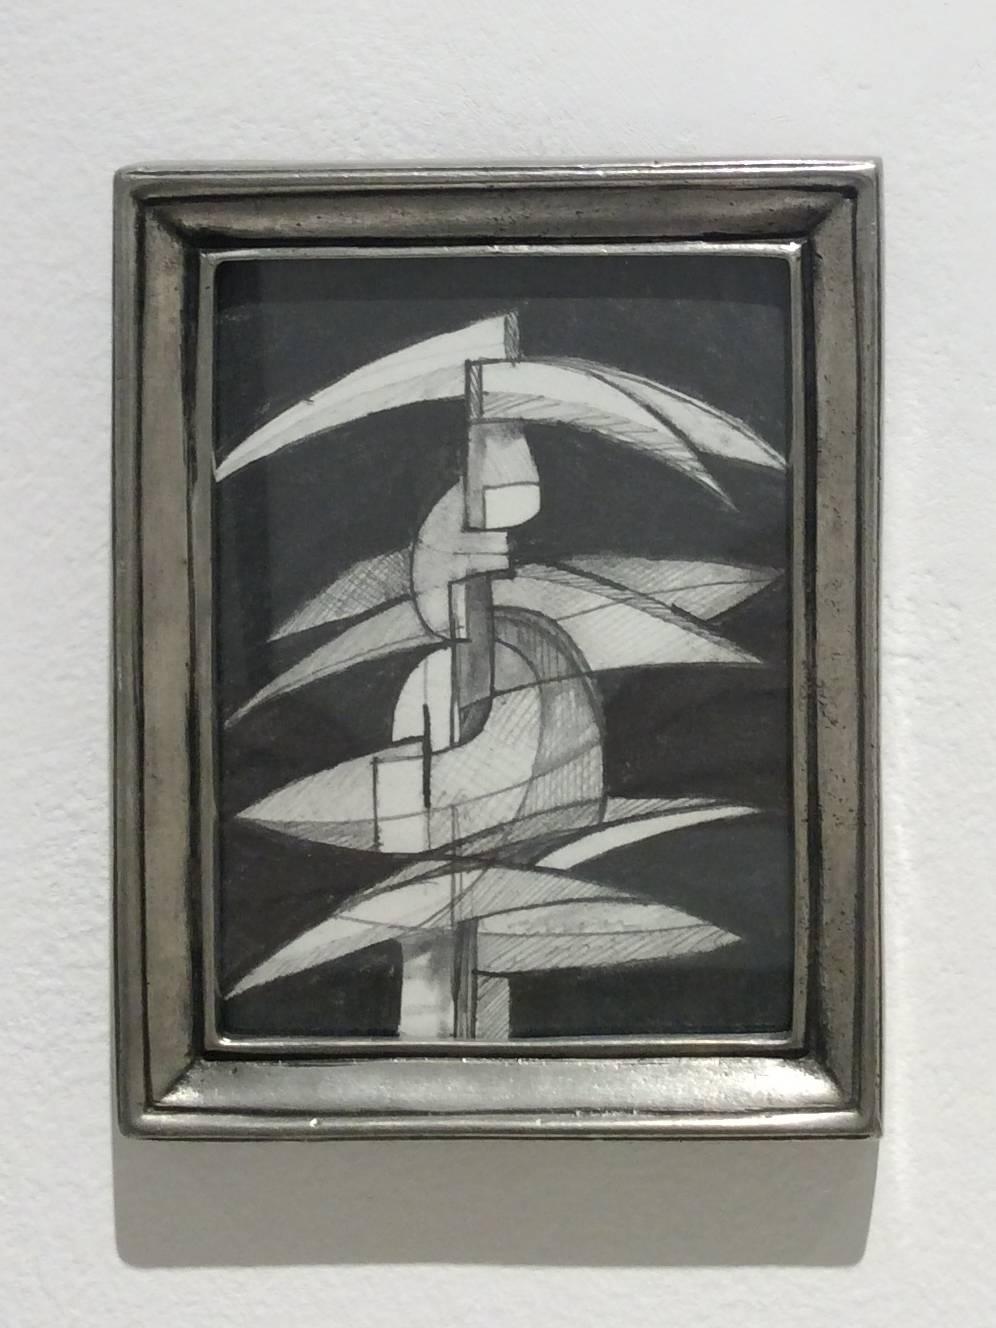 Infanta XLVIII (Abstract Figurative Graphite Drawing in Antique Pewter Frame) - Art by David Dew Bruner